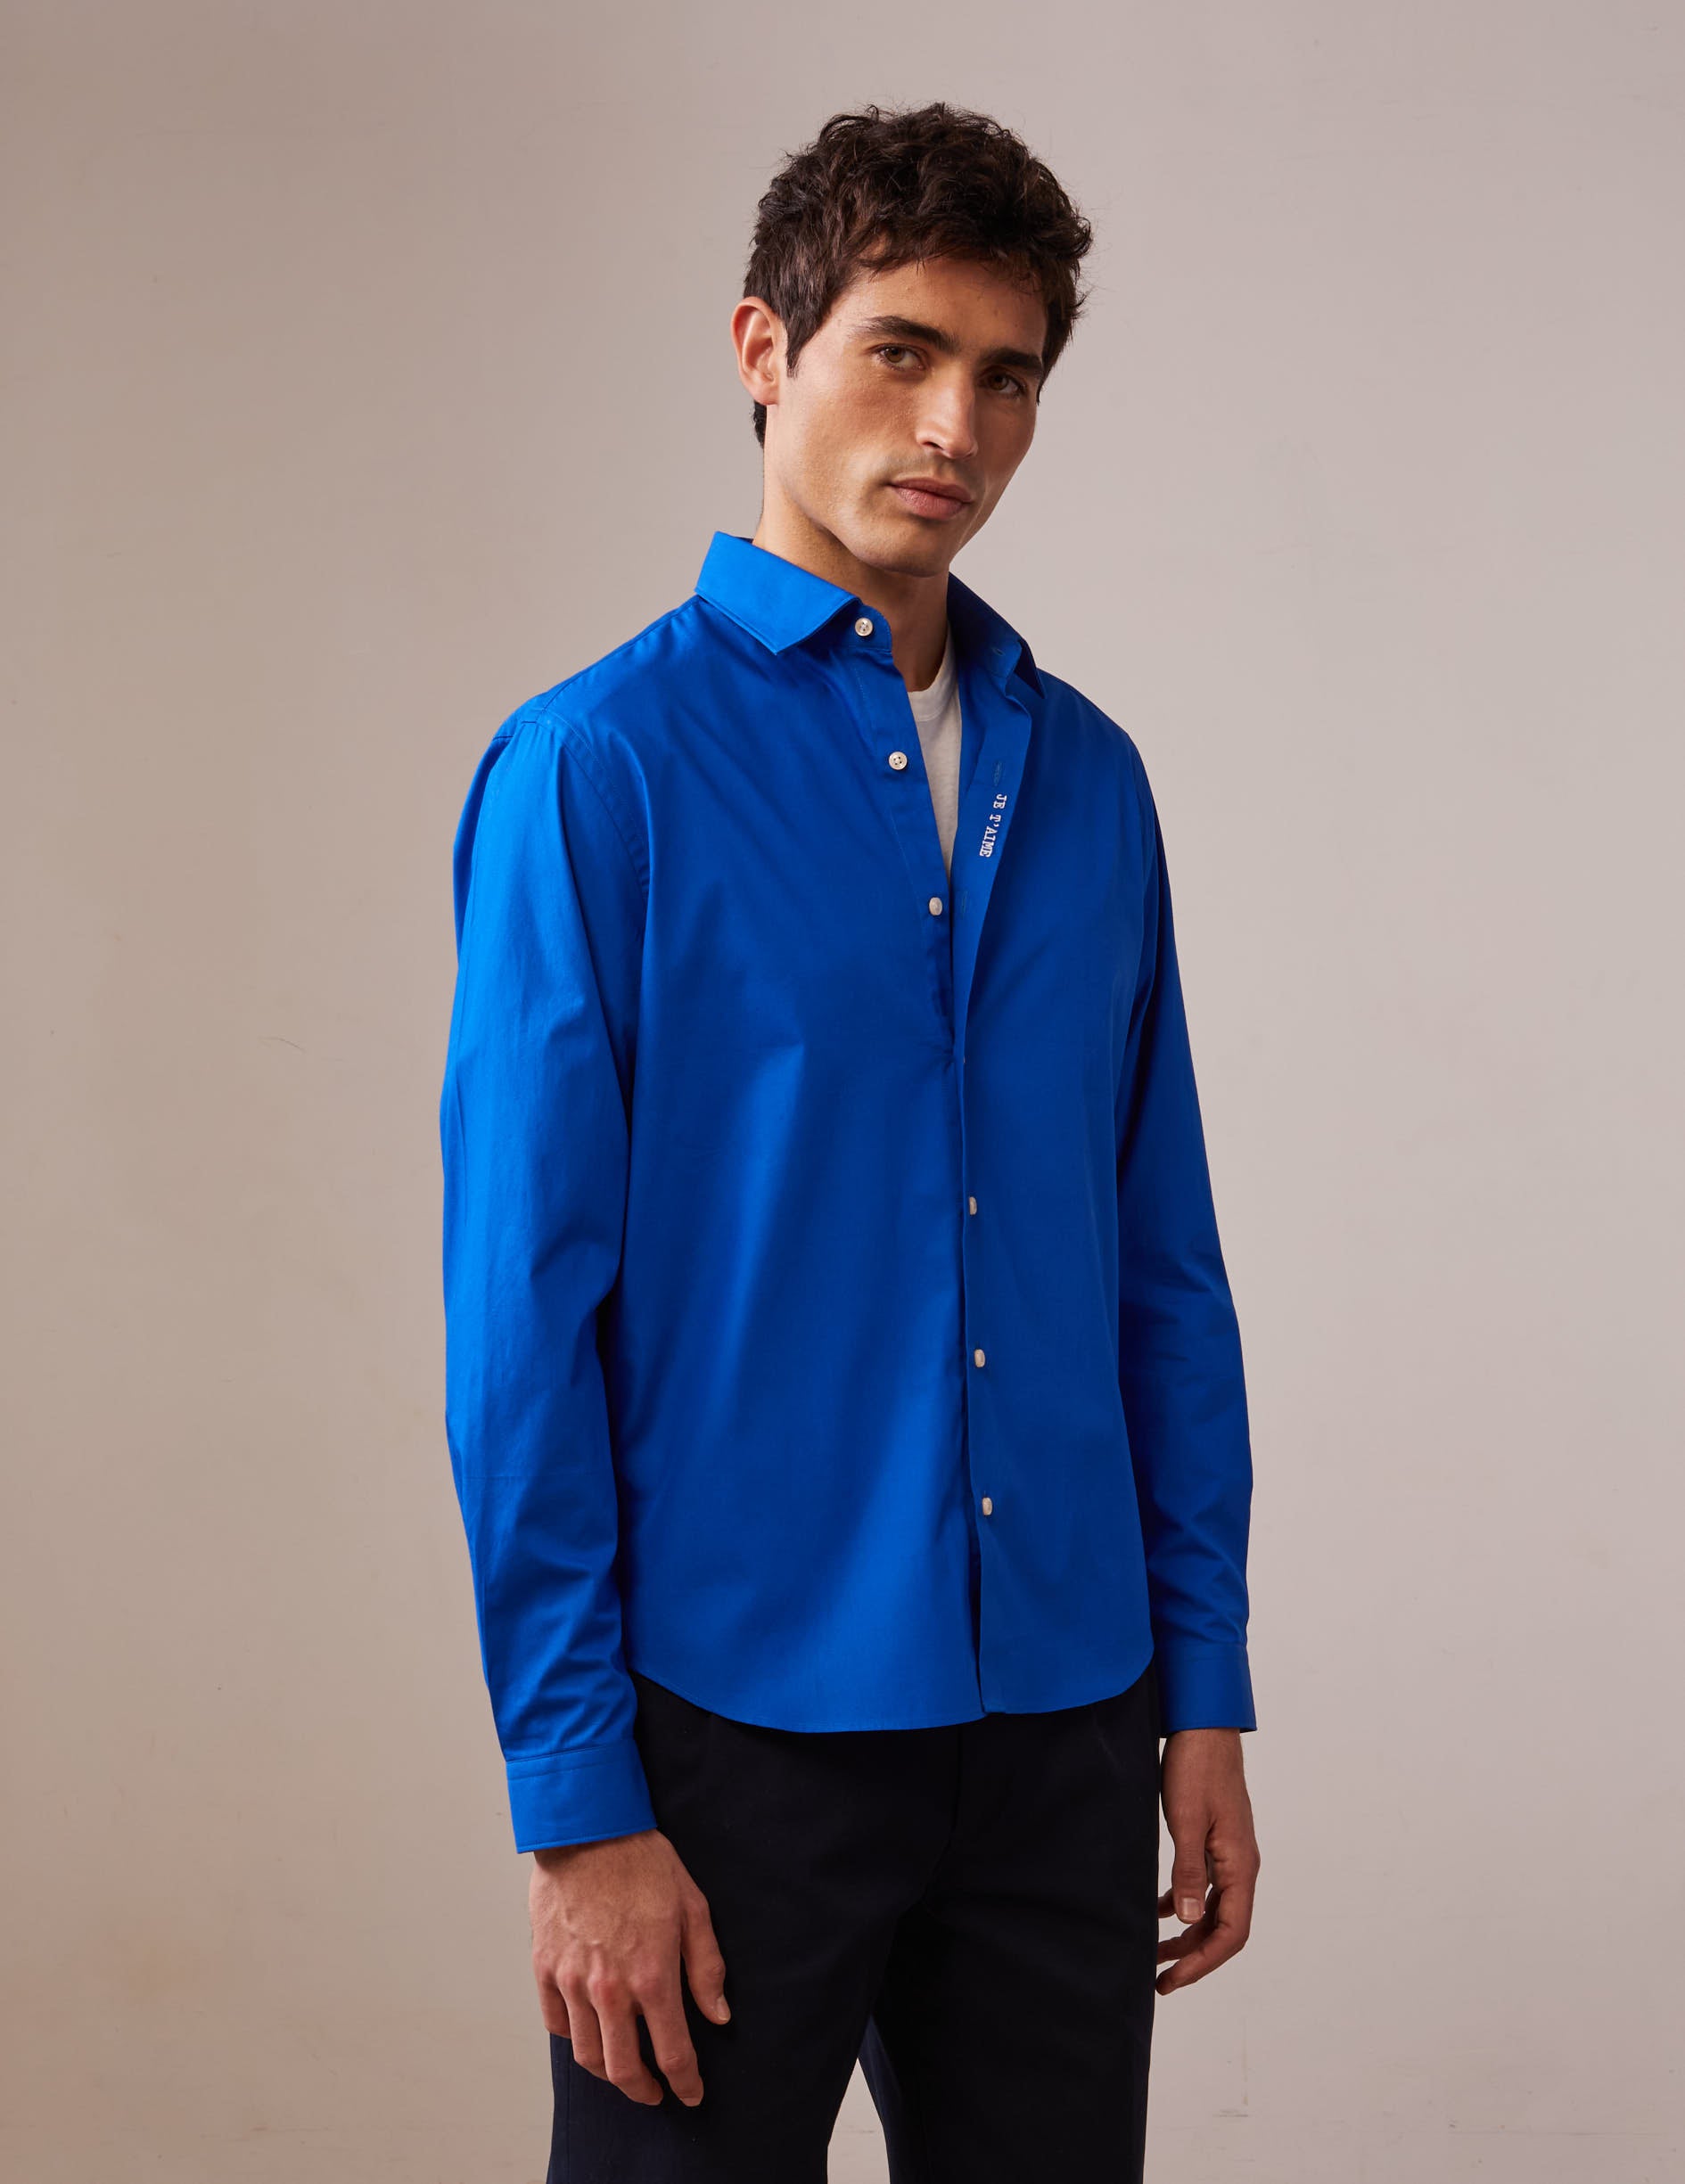 Blue "Je t'aime" shirt with white embroidery - Poplin - Figaret Collar